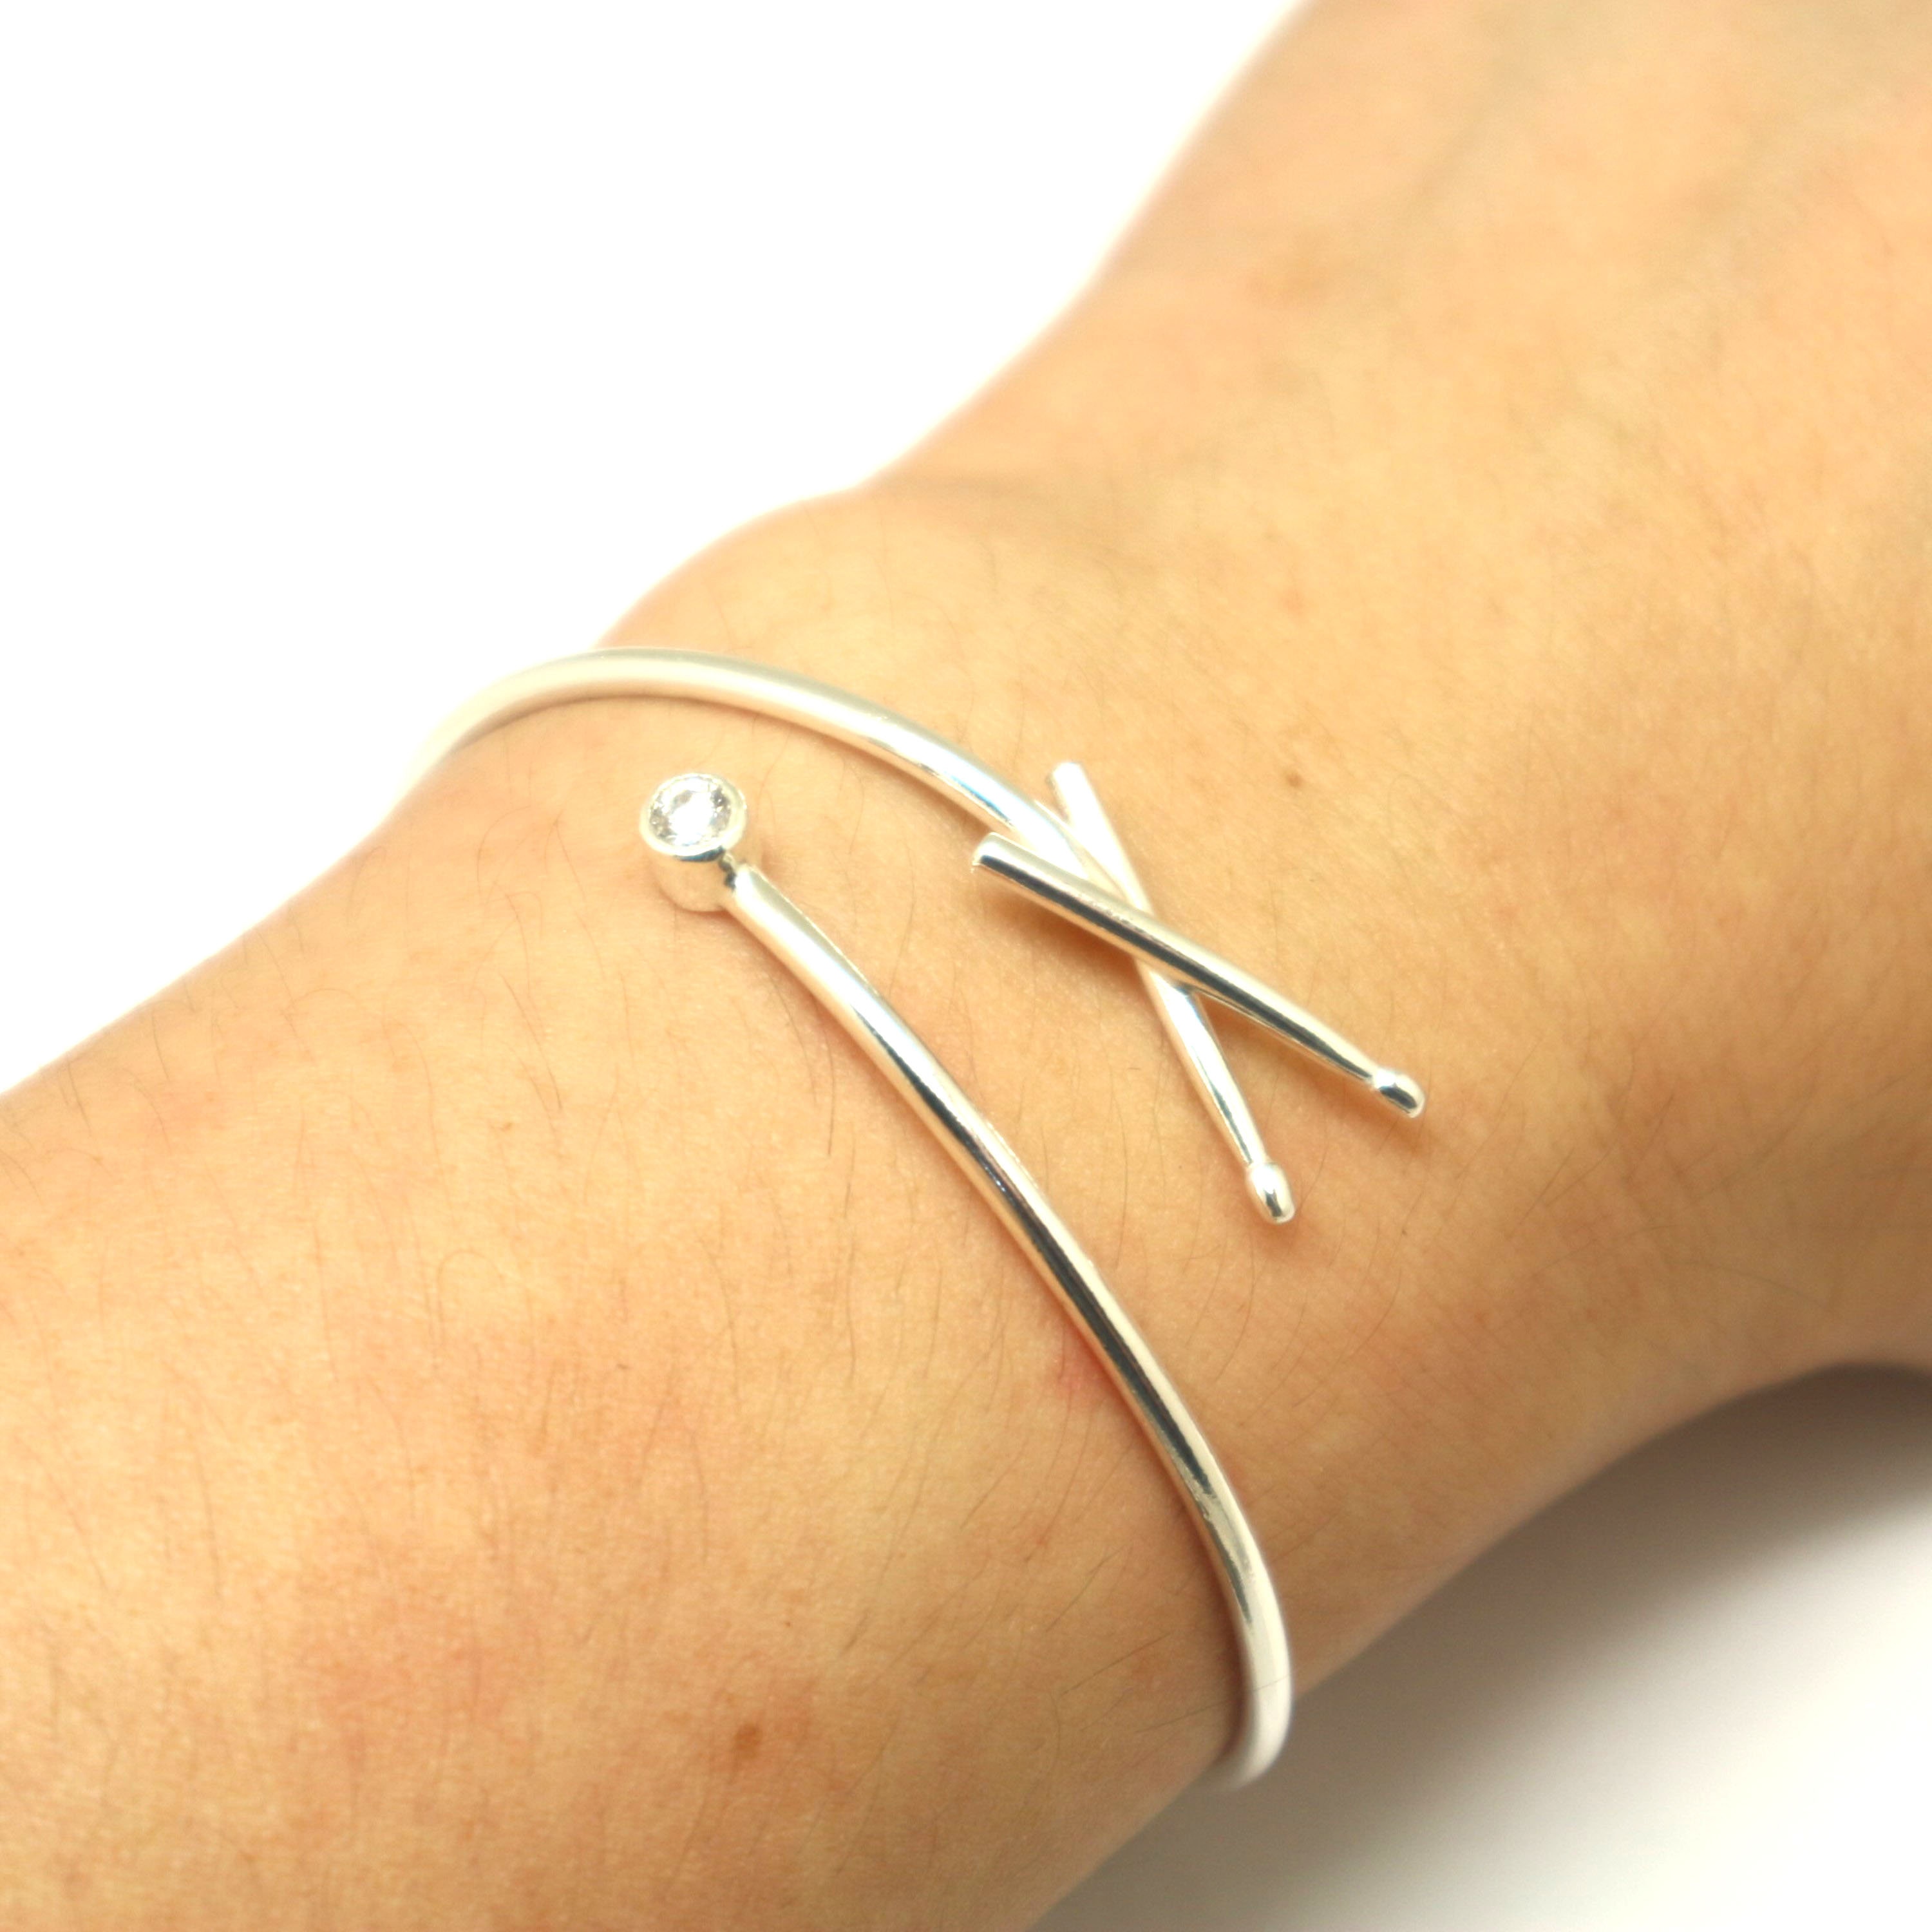 Uniquely Crafted Silver Drumstick Bracelet